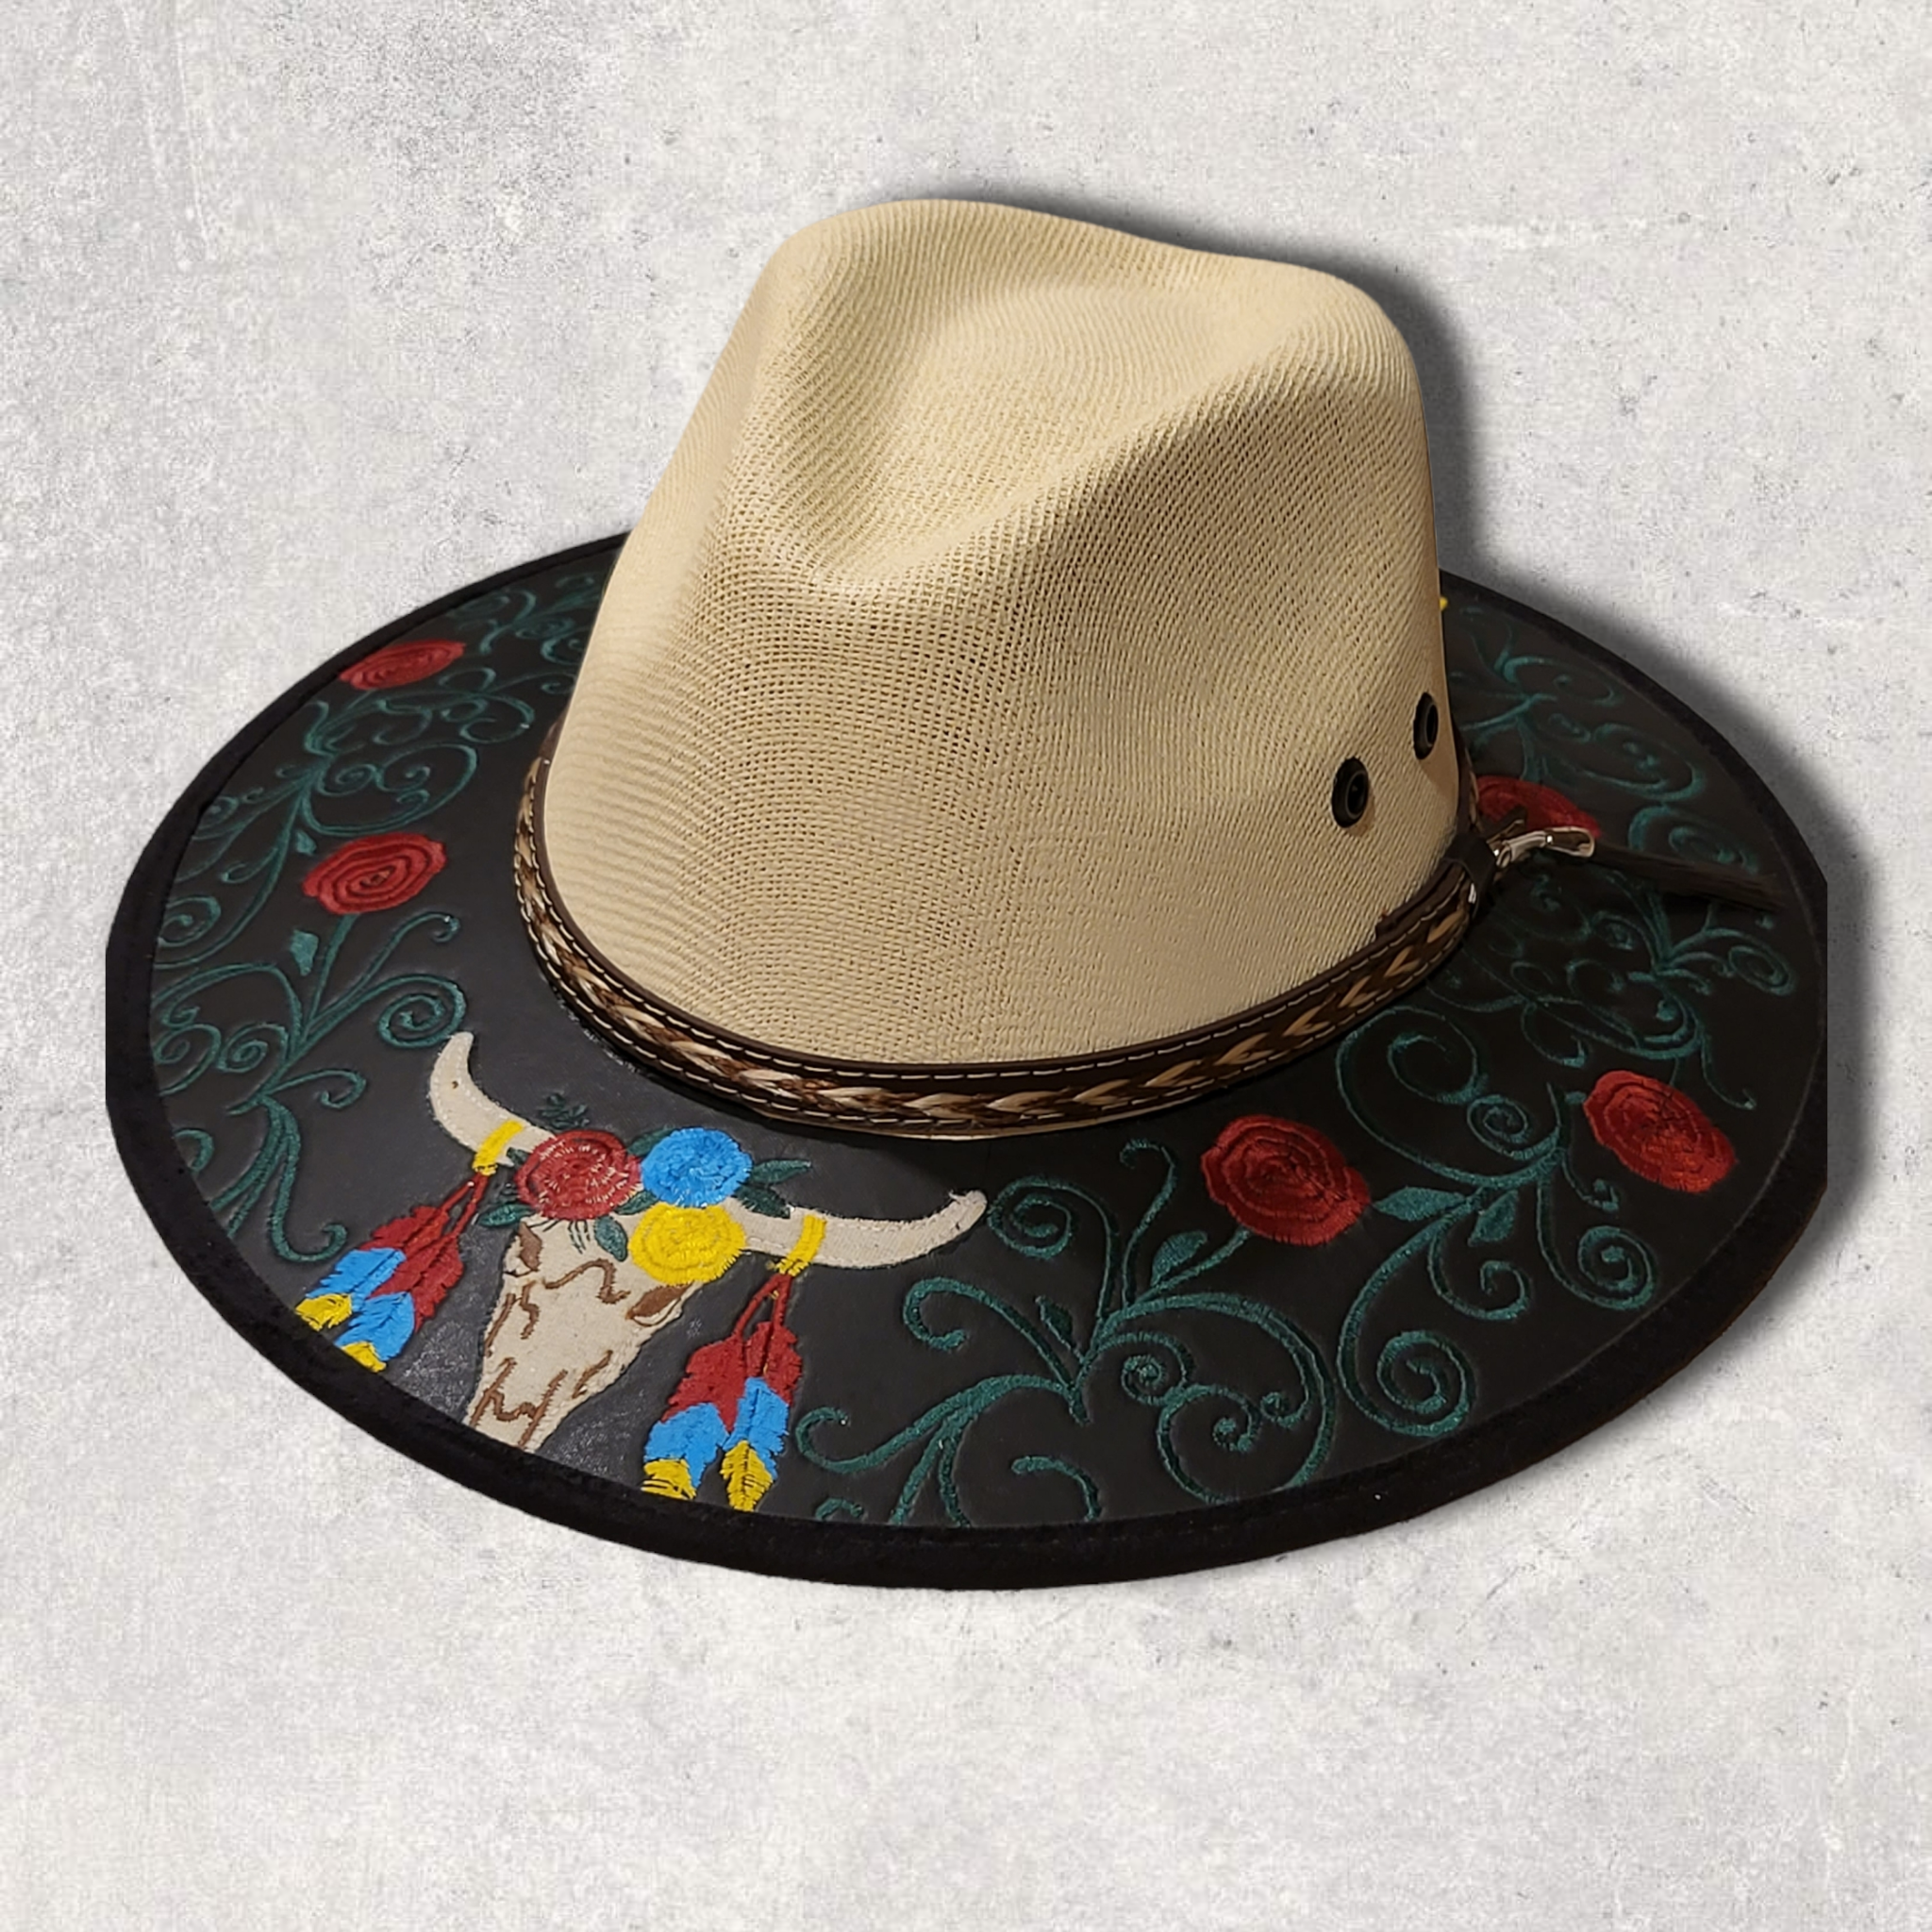 Embroidered Iron on Patch Cowboy Hat Cowgirl Hat Holographic Western BOHO  Yeehaw Patches for Clothing Backpack Hats 